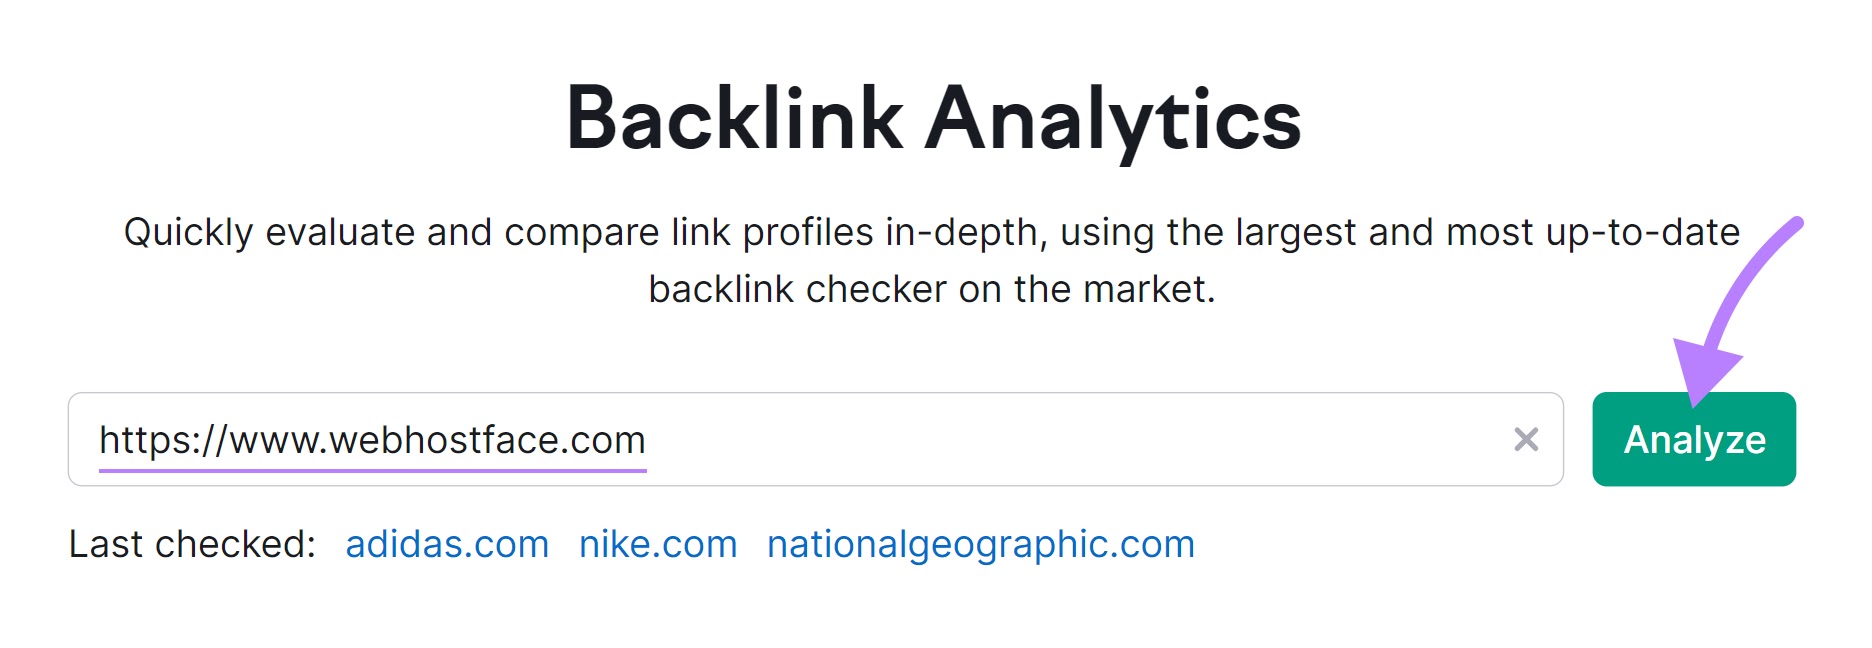 Backlink Analytics with a competitor's URL